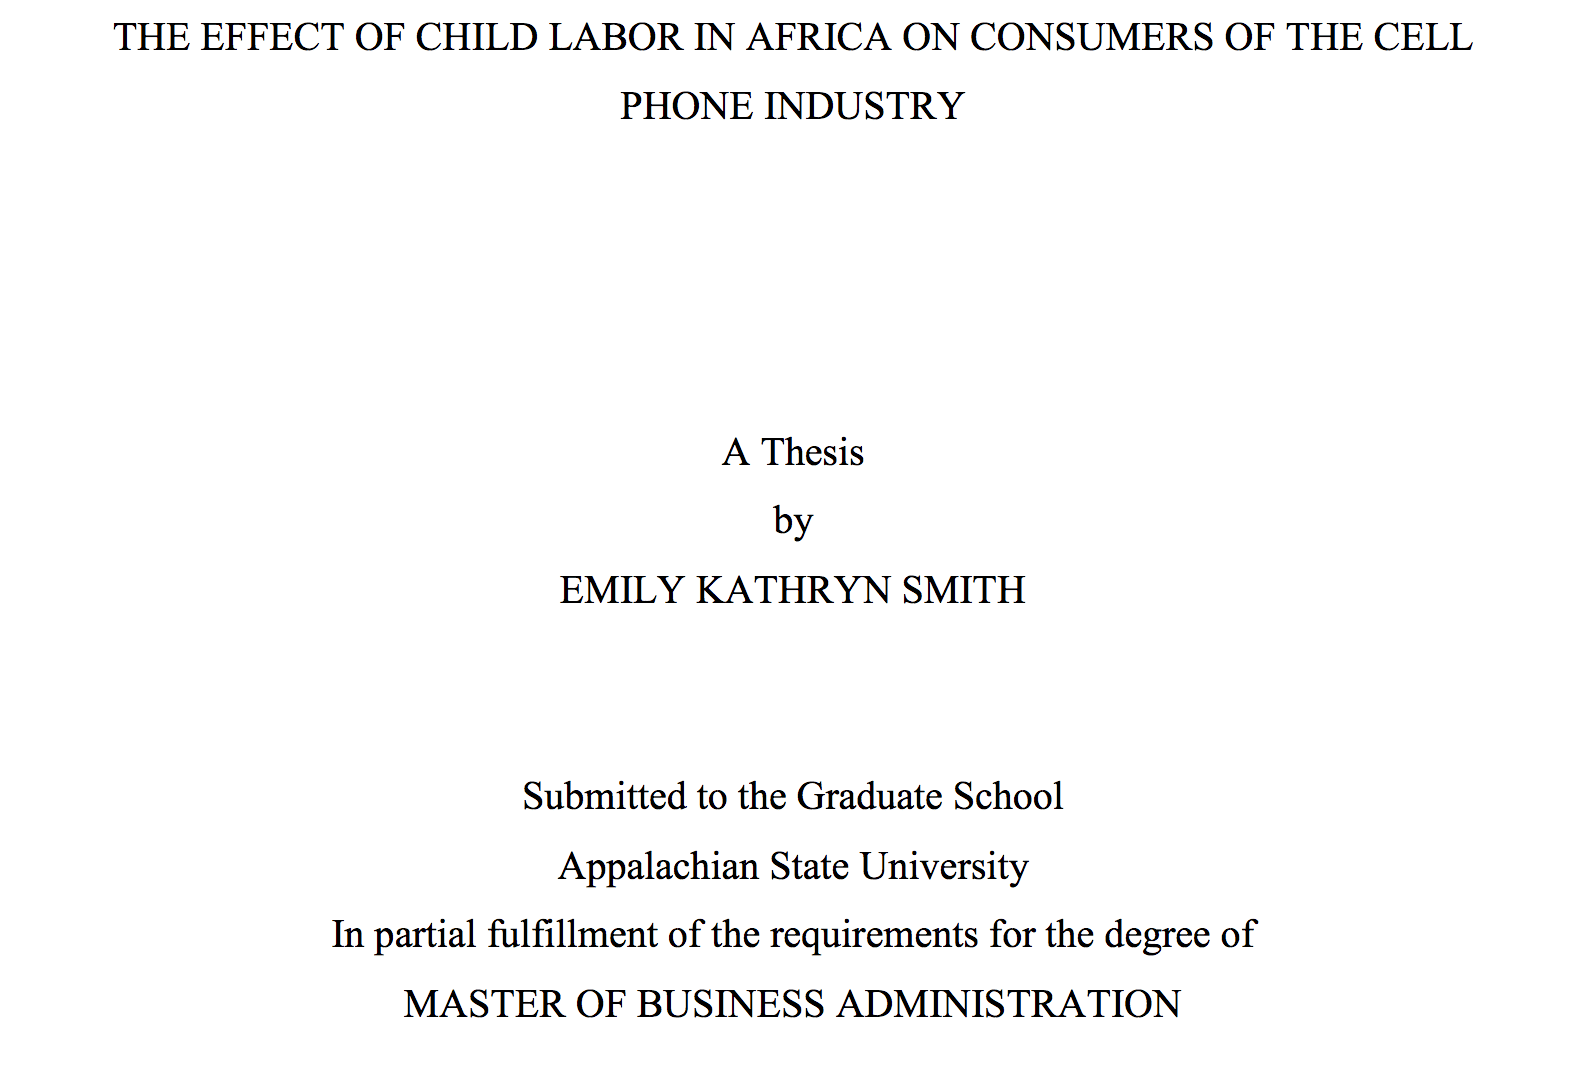 The effect of child labor in Africa on consumers of the cell-phone industry